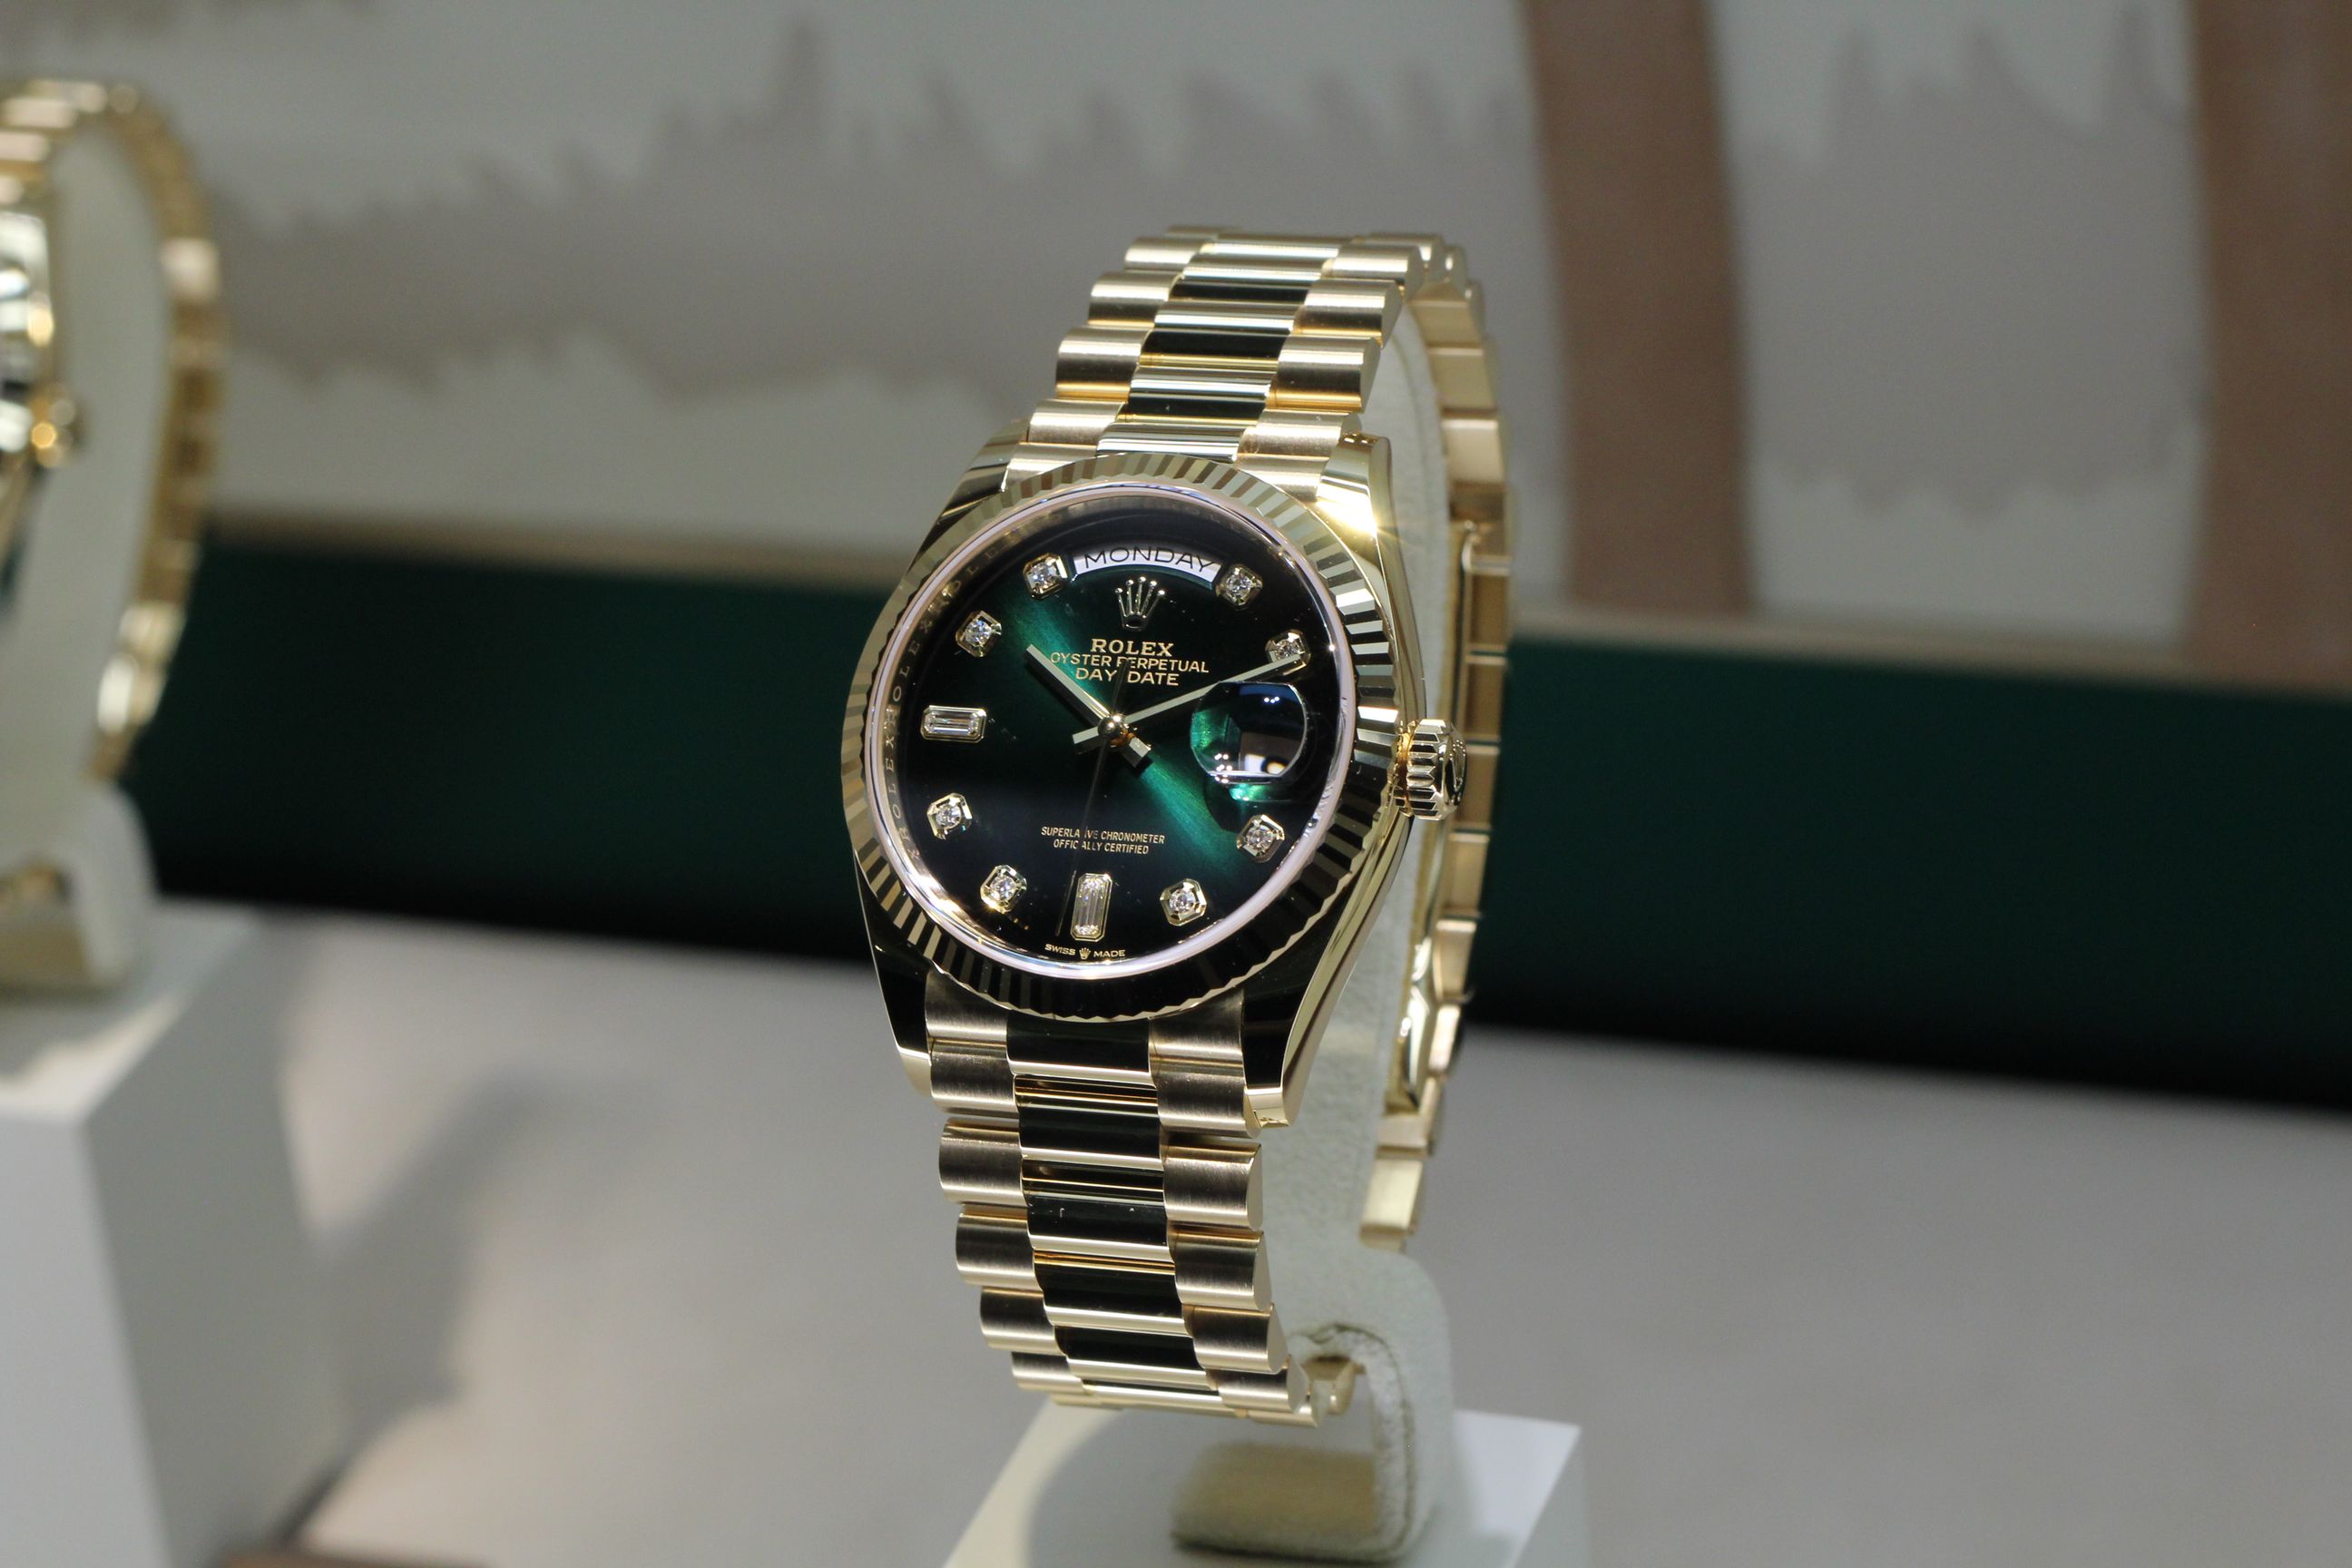 Baselworld 2019: New Rolex Day-Date 36 